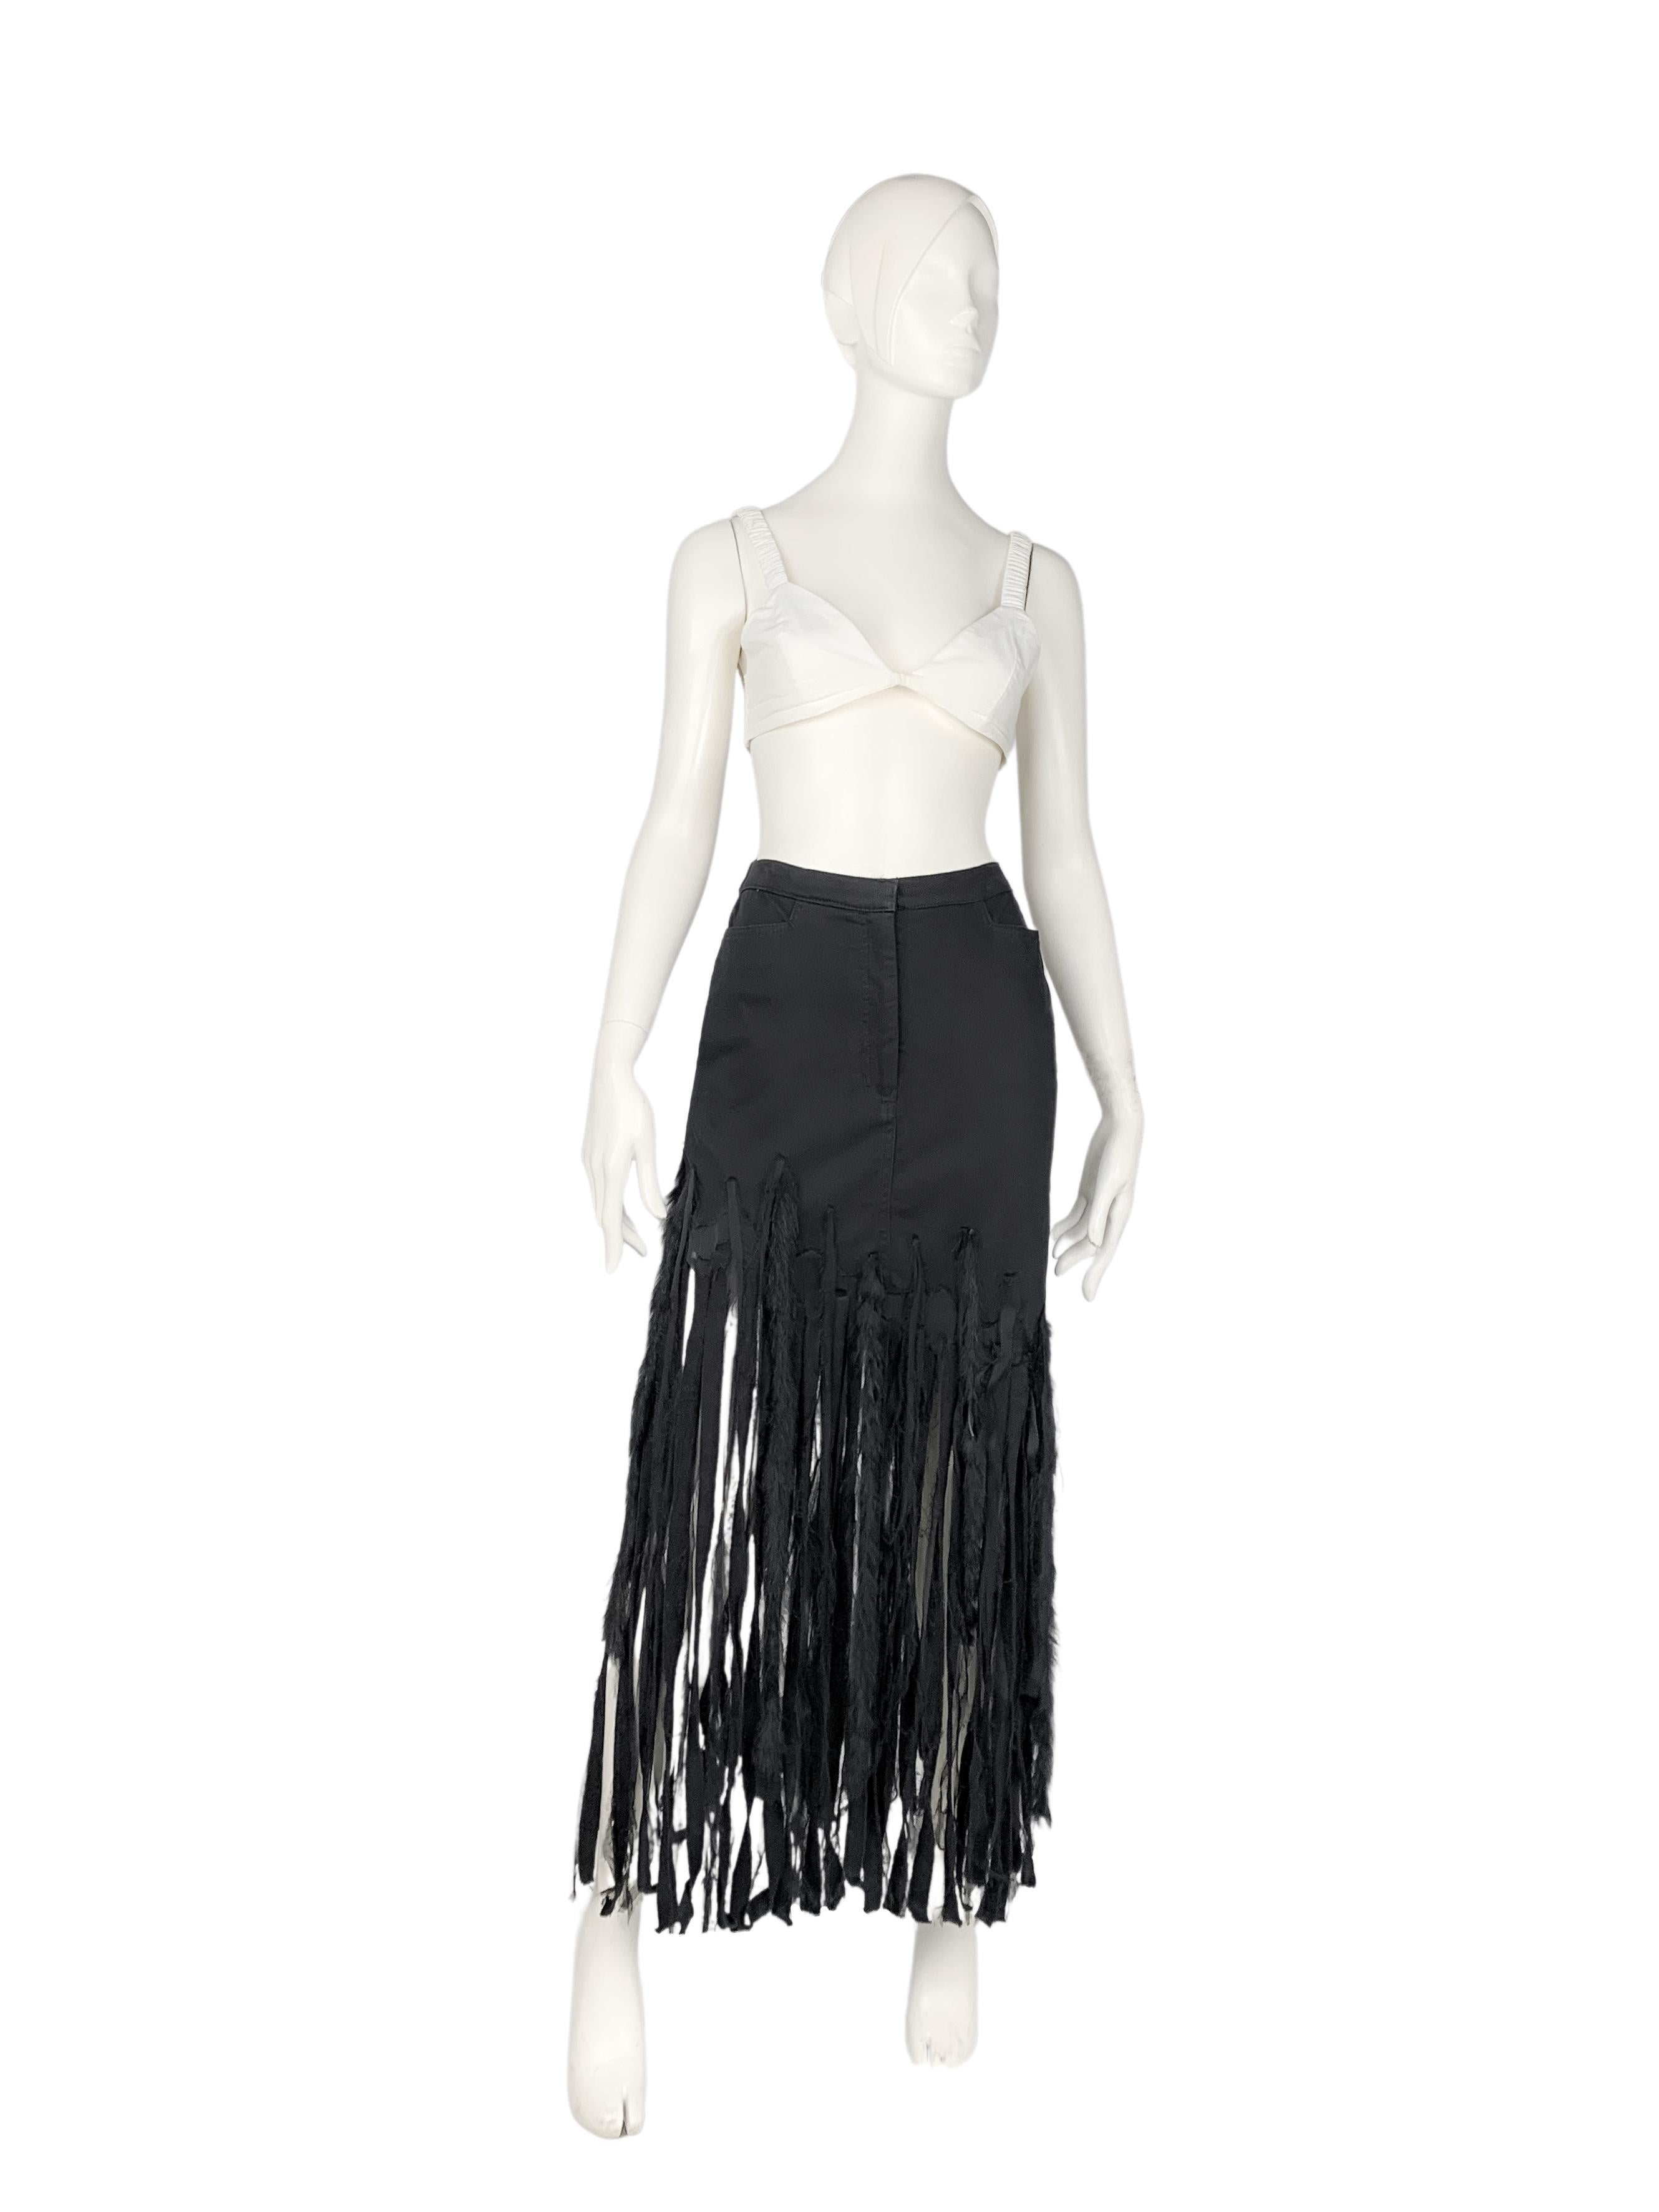 Women's Ungaro 1990s vintage extravagant fringed maxi skirt with details in faux fur